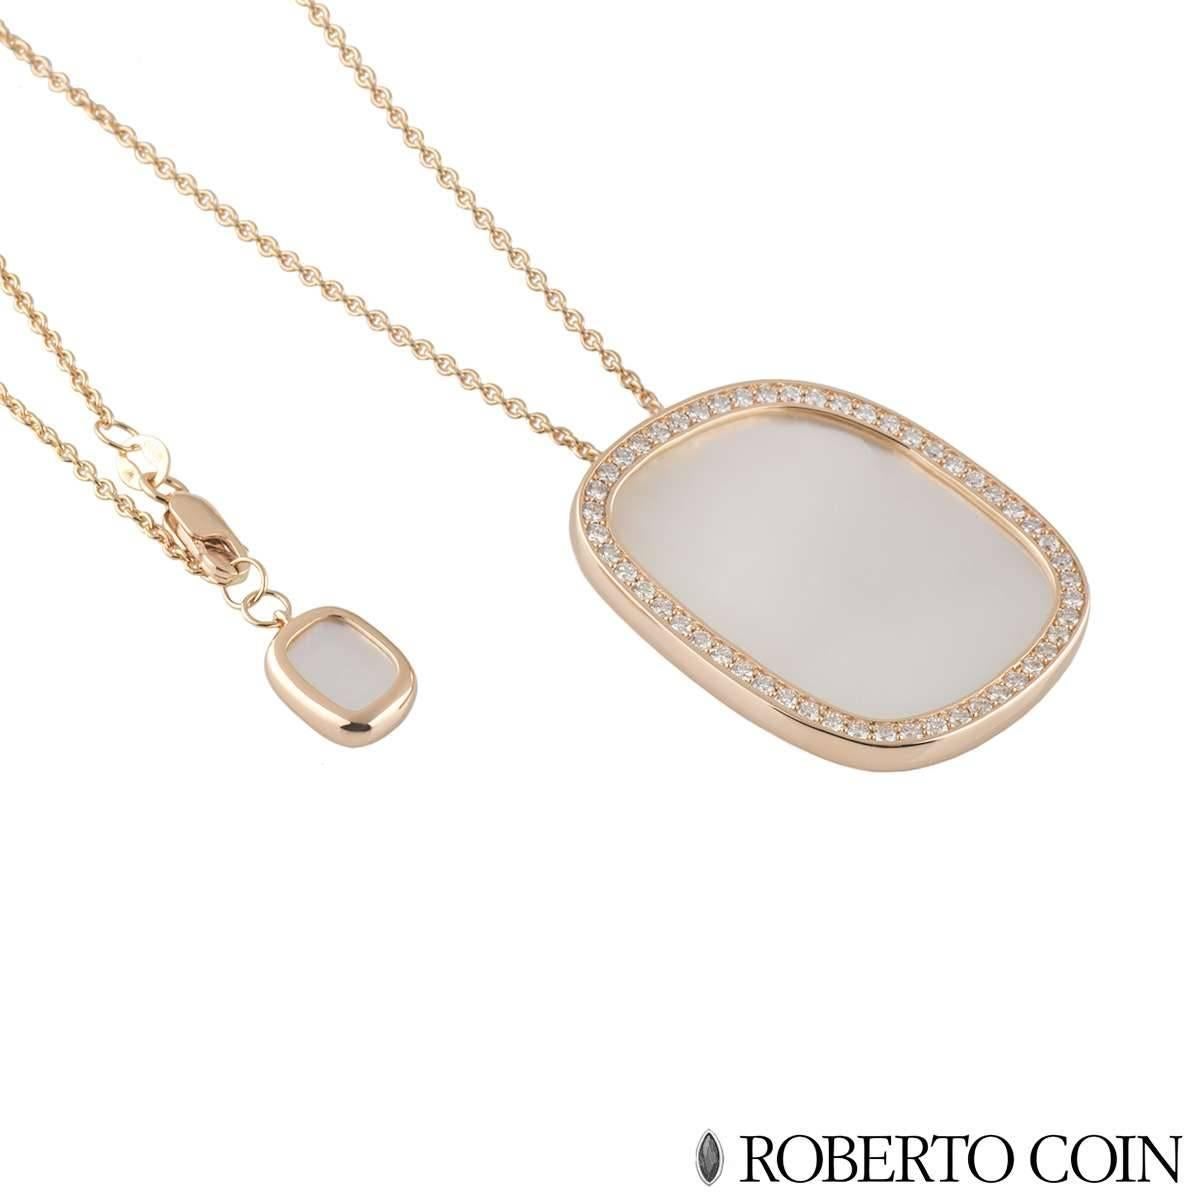 A beautiful 18k rose gold diamond and mother of pearl Roberto Coin pendant from the Coins Classics Black Jade collection. The pendant comprises of an abstract rectangular motif with an inlay of mother of pearl with round brilliant cut diamonds